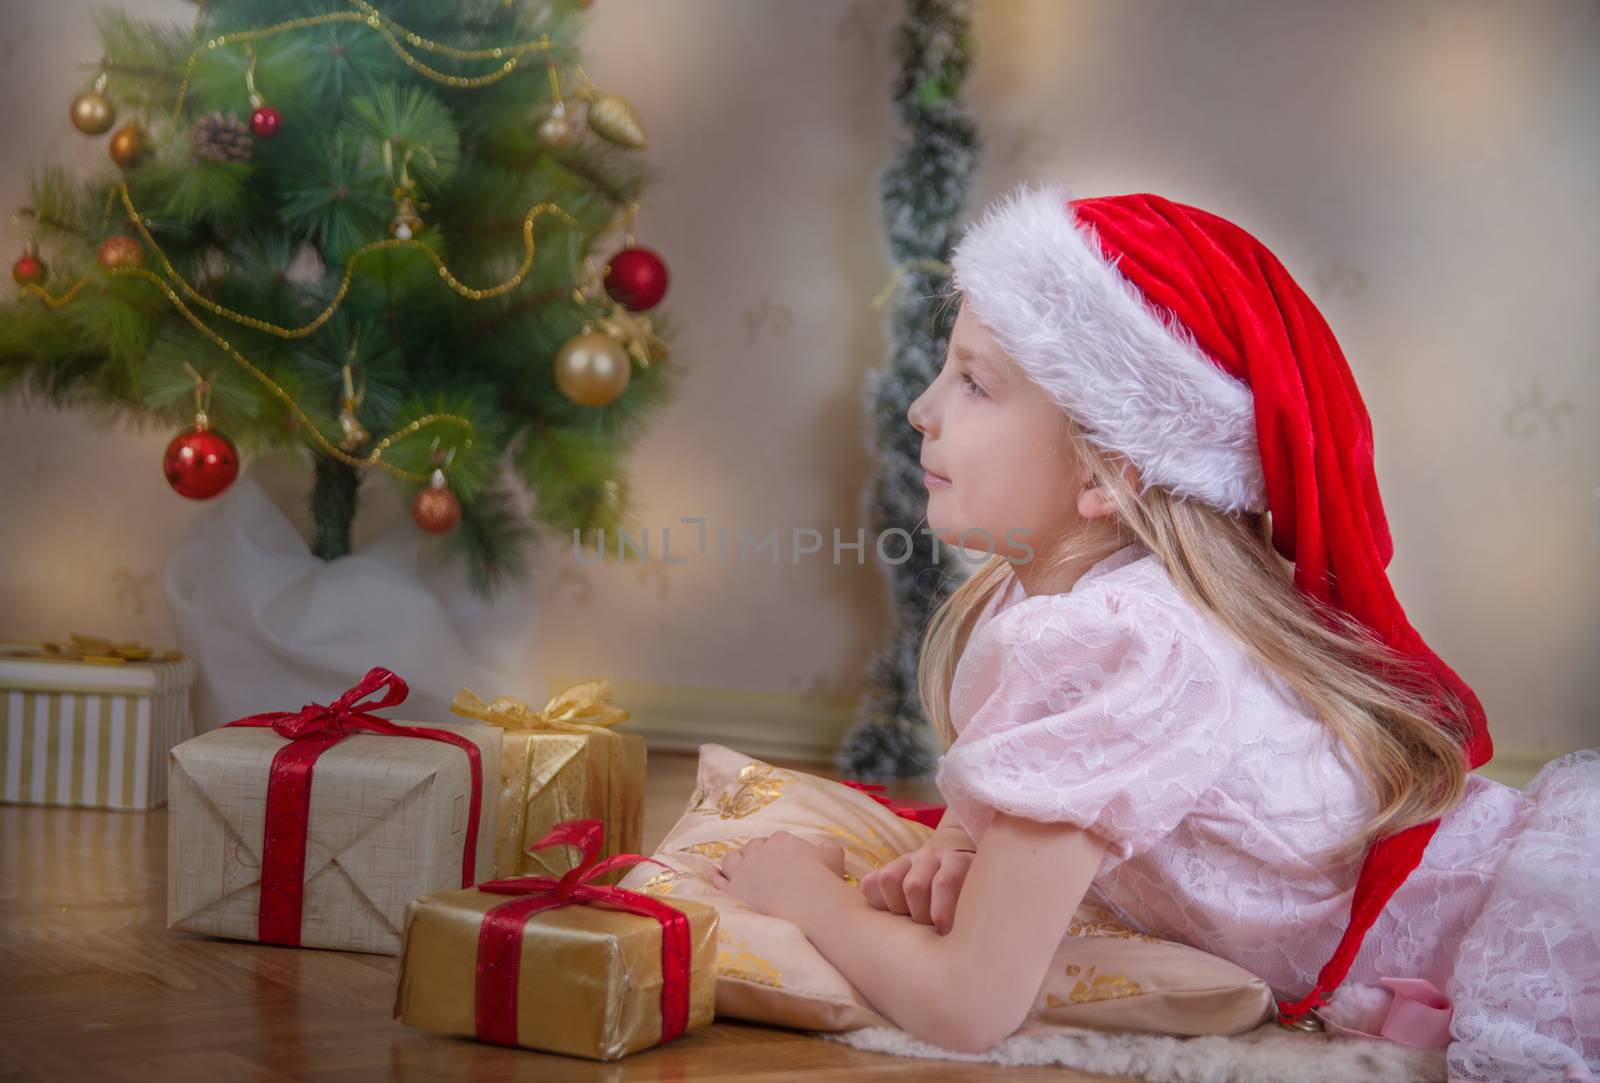 Girl in Santa hat dreaming under Christmas tree by Angel_a